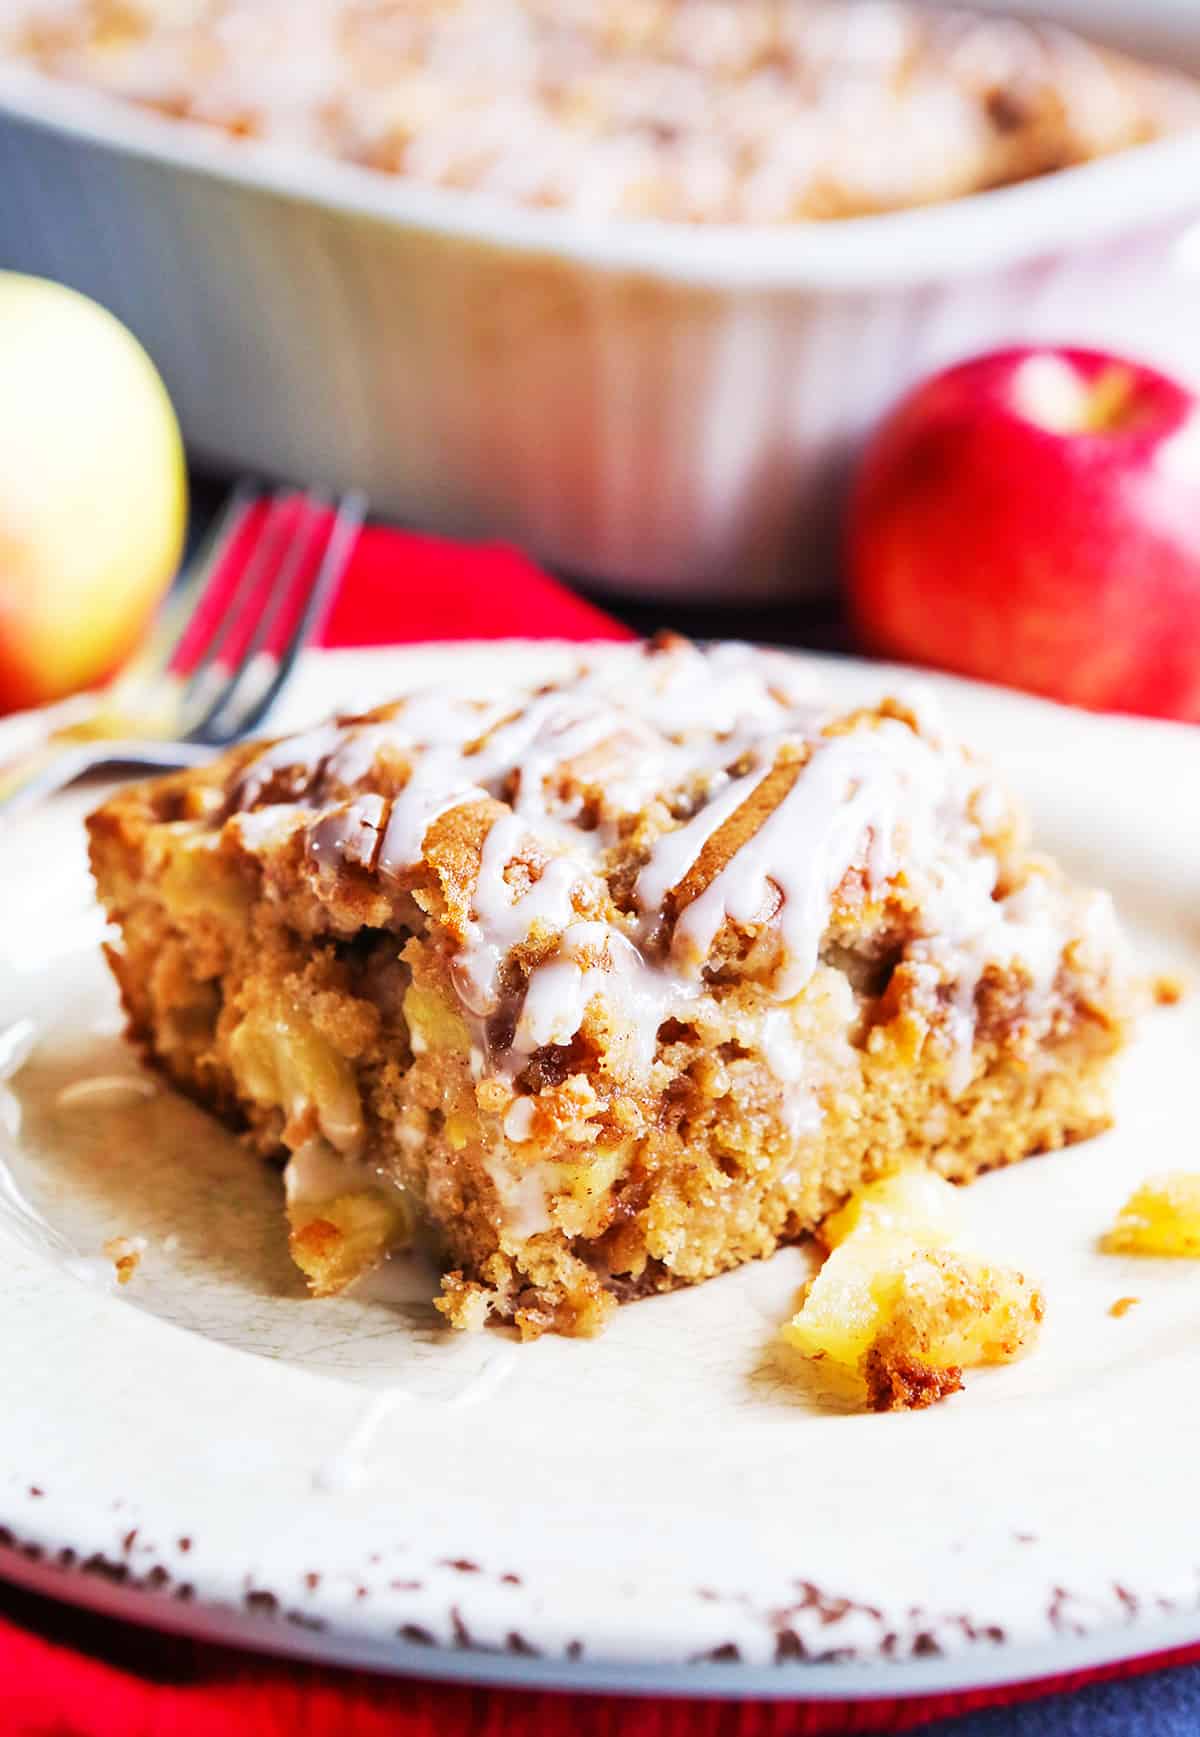 Slice of apple coffee cake drizzled with icing.